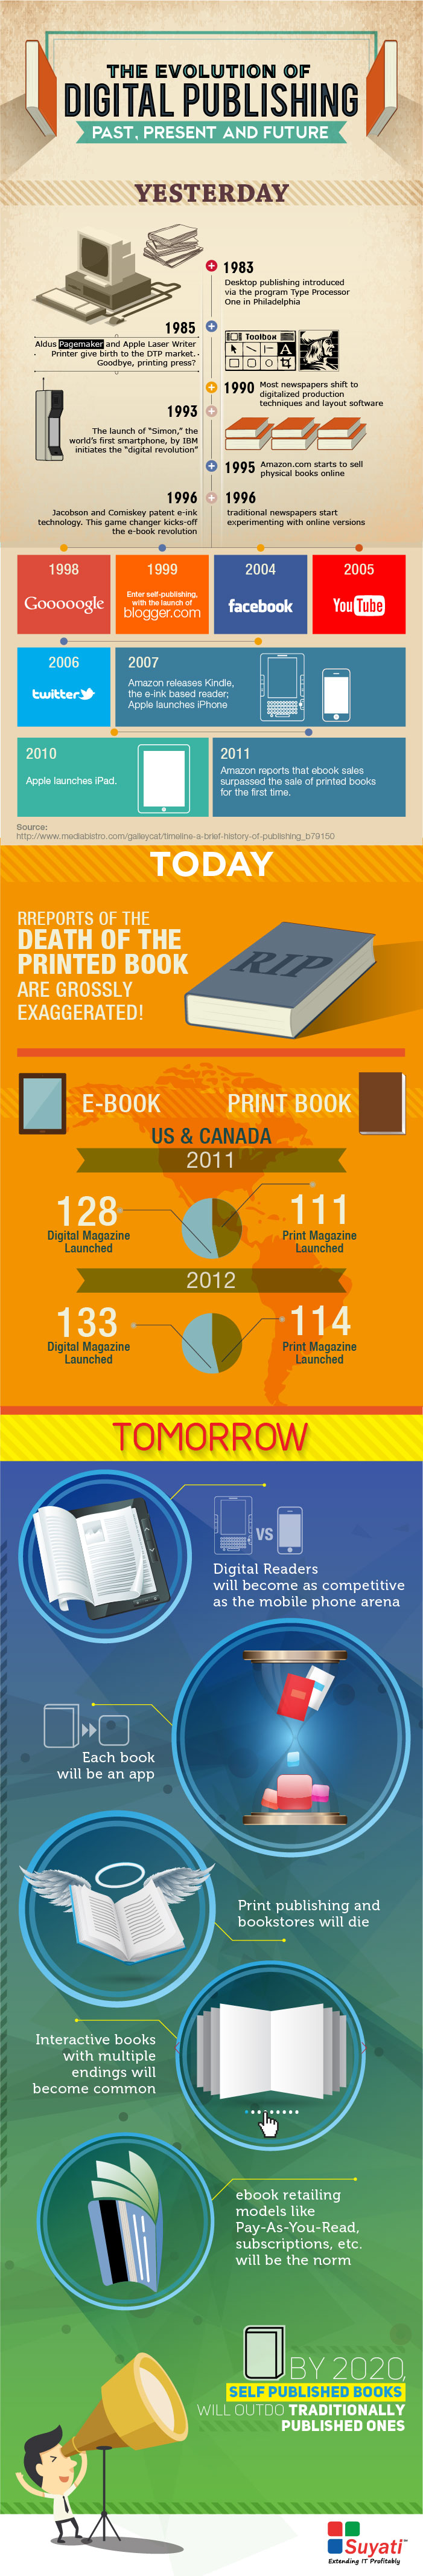 A look into the past, present, and future of digital publishing